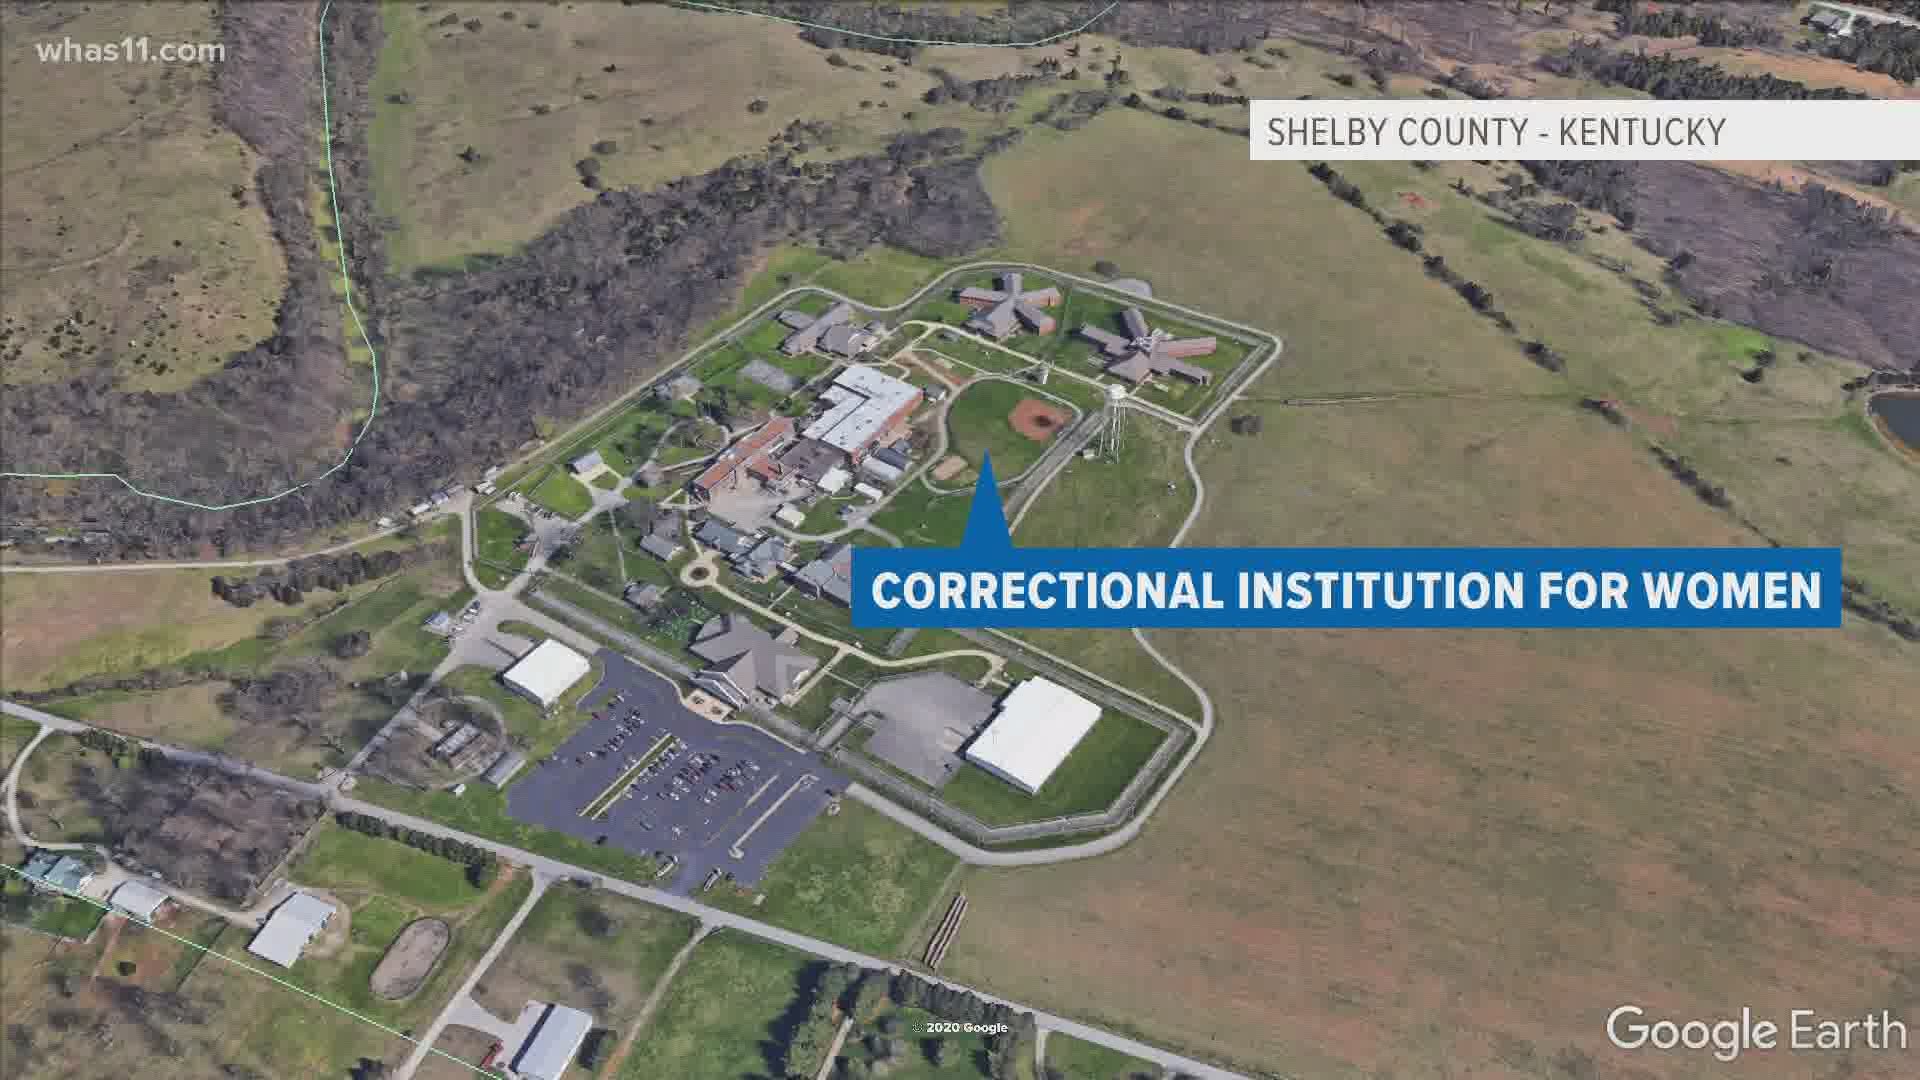 More than 90 cases of the coronavirus have been reported at a correctional facility in Shelby County.